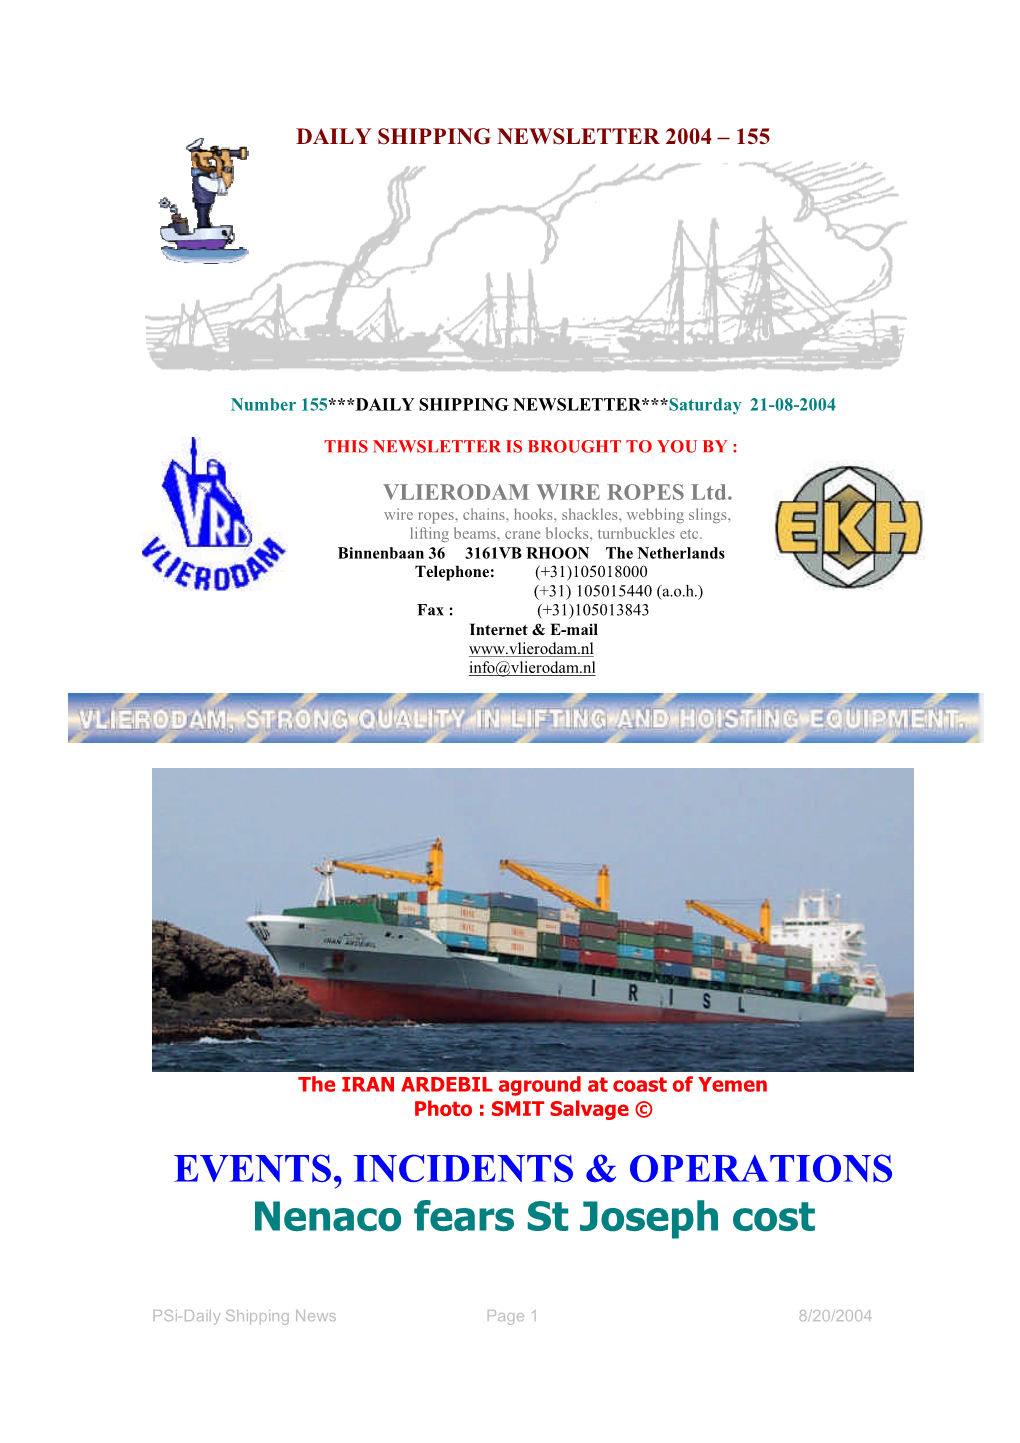 EVENTS, INCIDENTS & OPERATIONS Nenaco Fears St